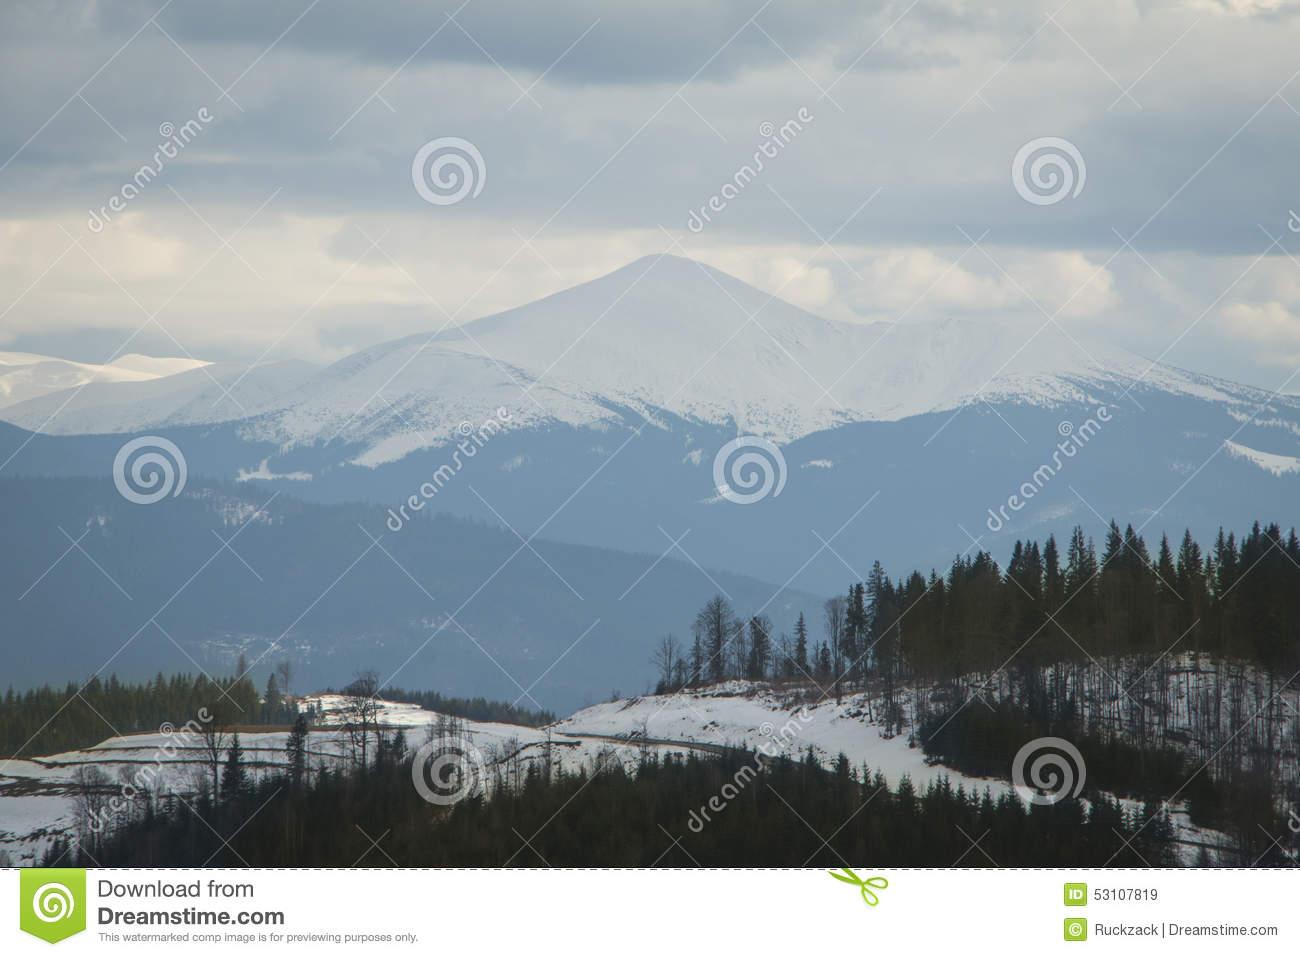 High Snowy Mountain In Foggy Weather And Clouds 